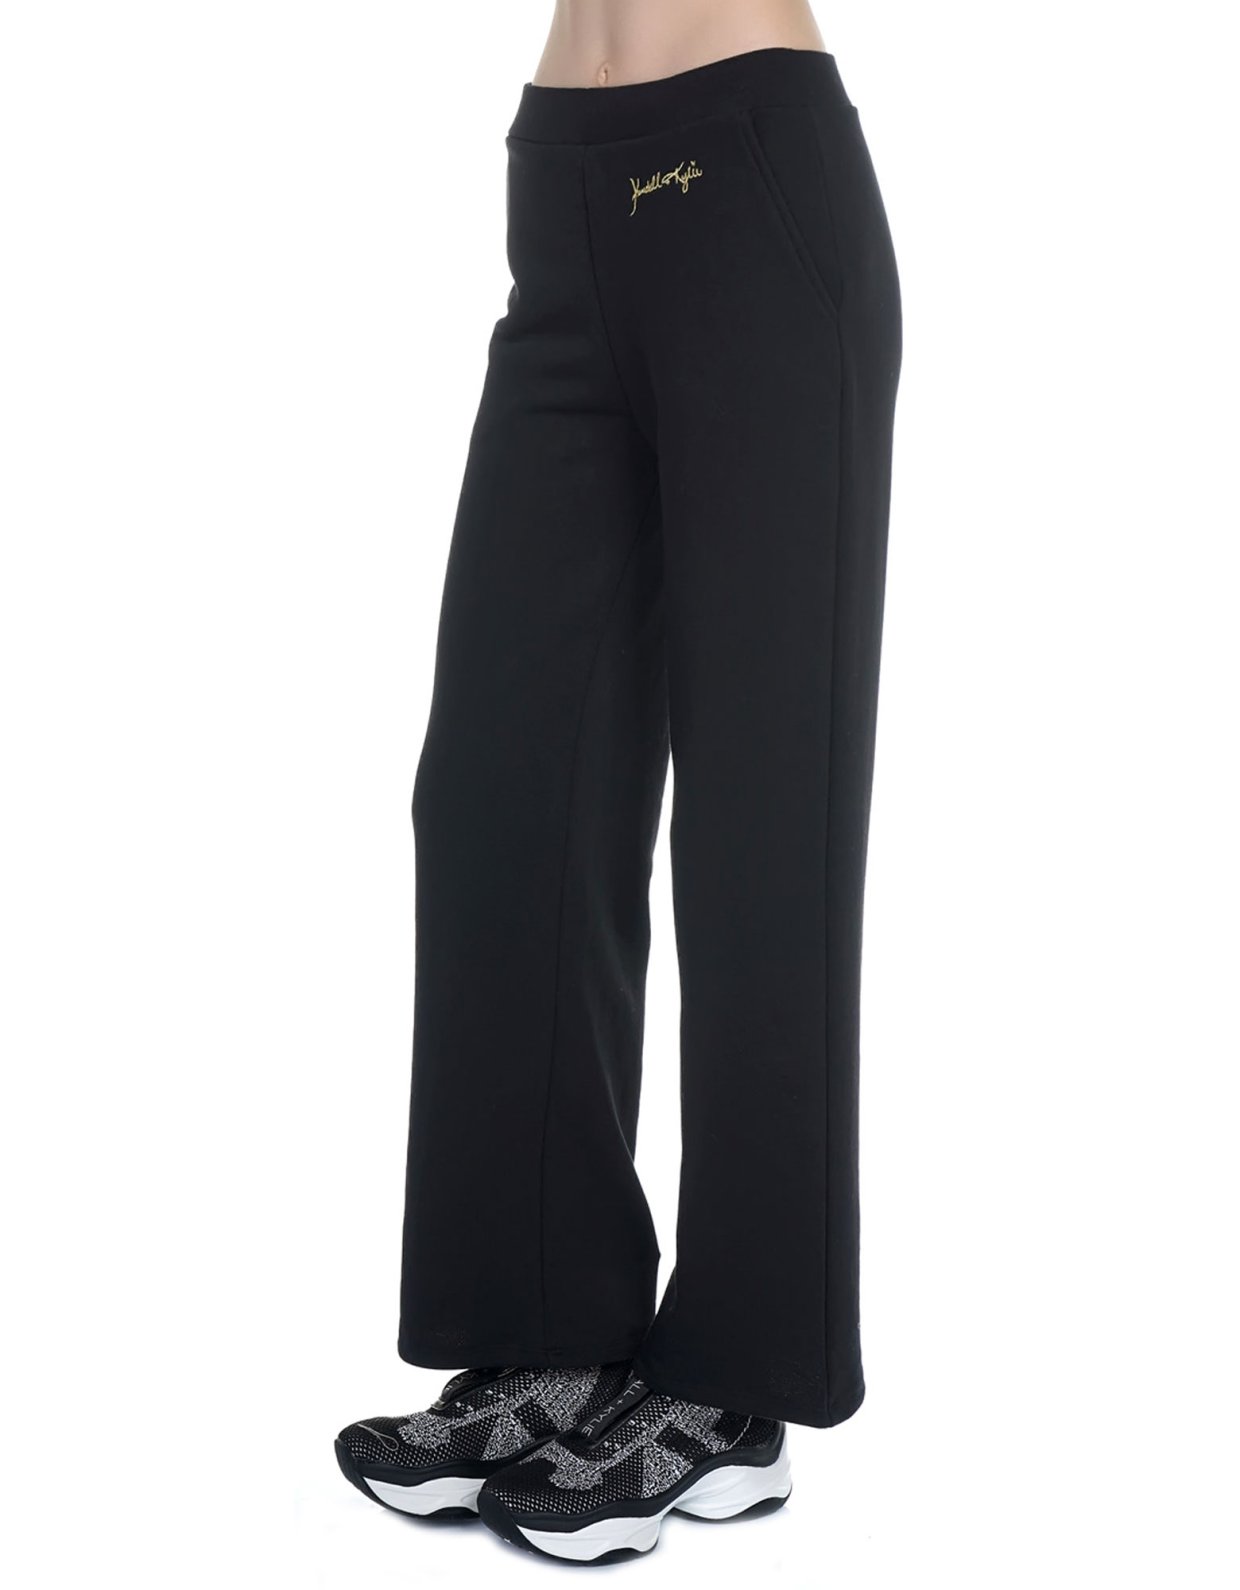 Kendall + Kylie Classic straight sweatpants black